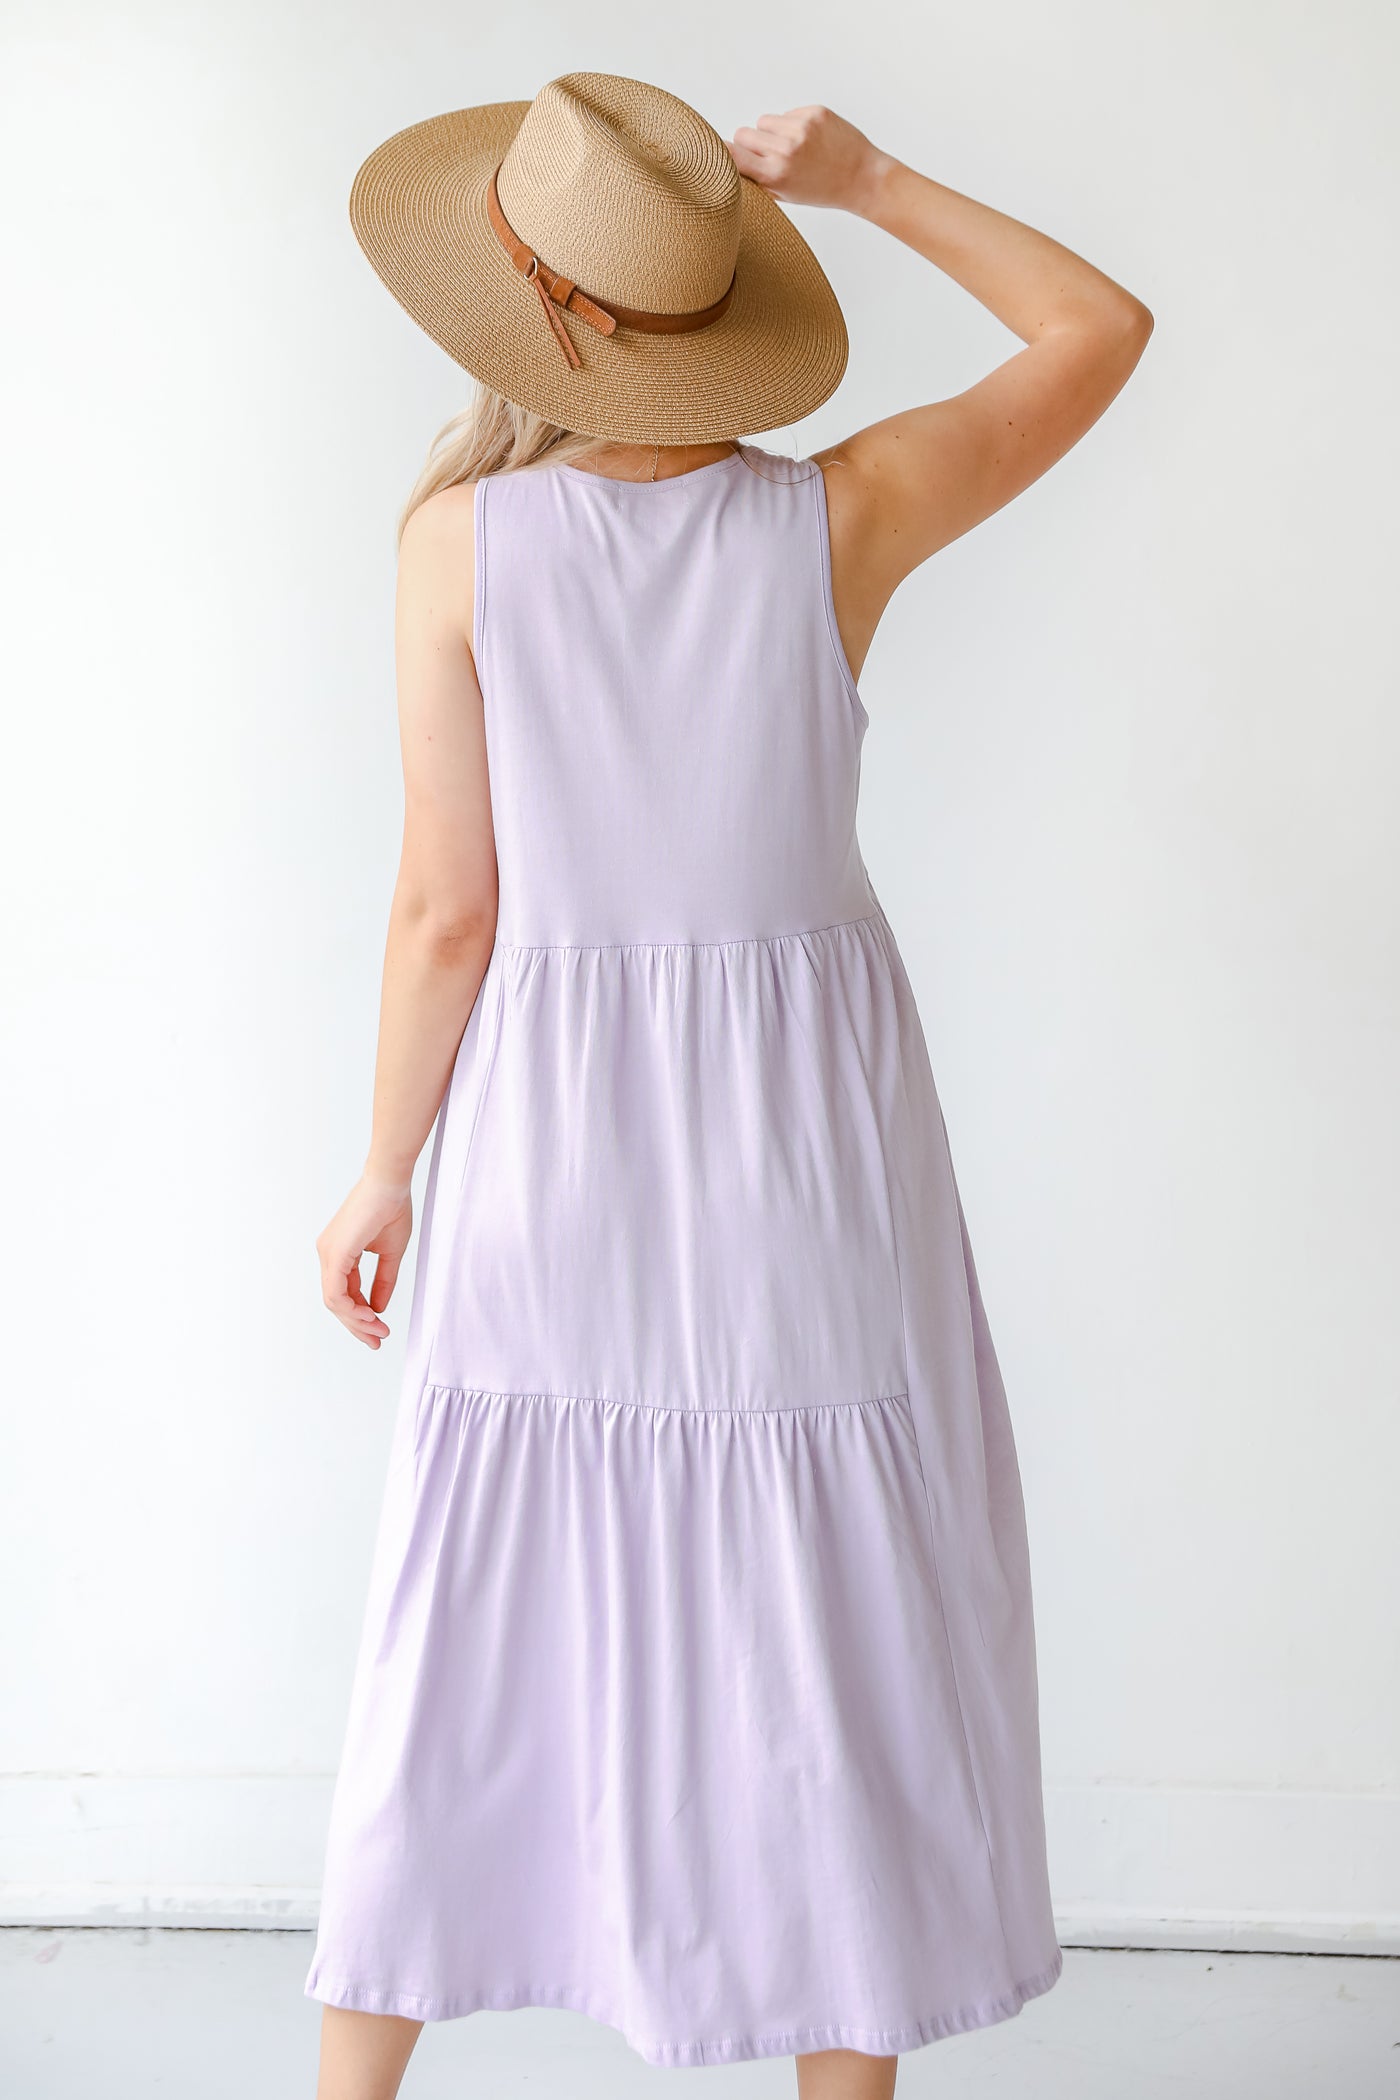 Tiered Maxi Dress in lilac back view